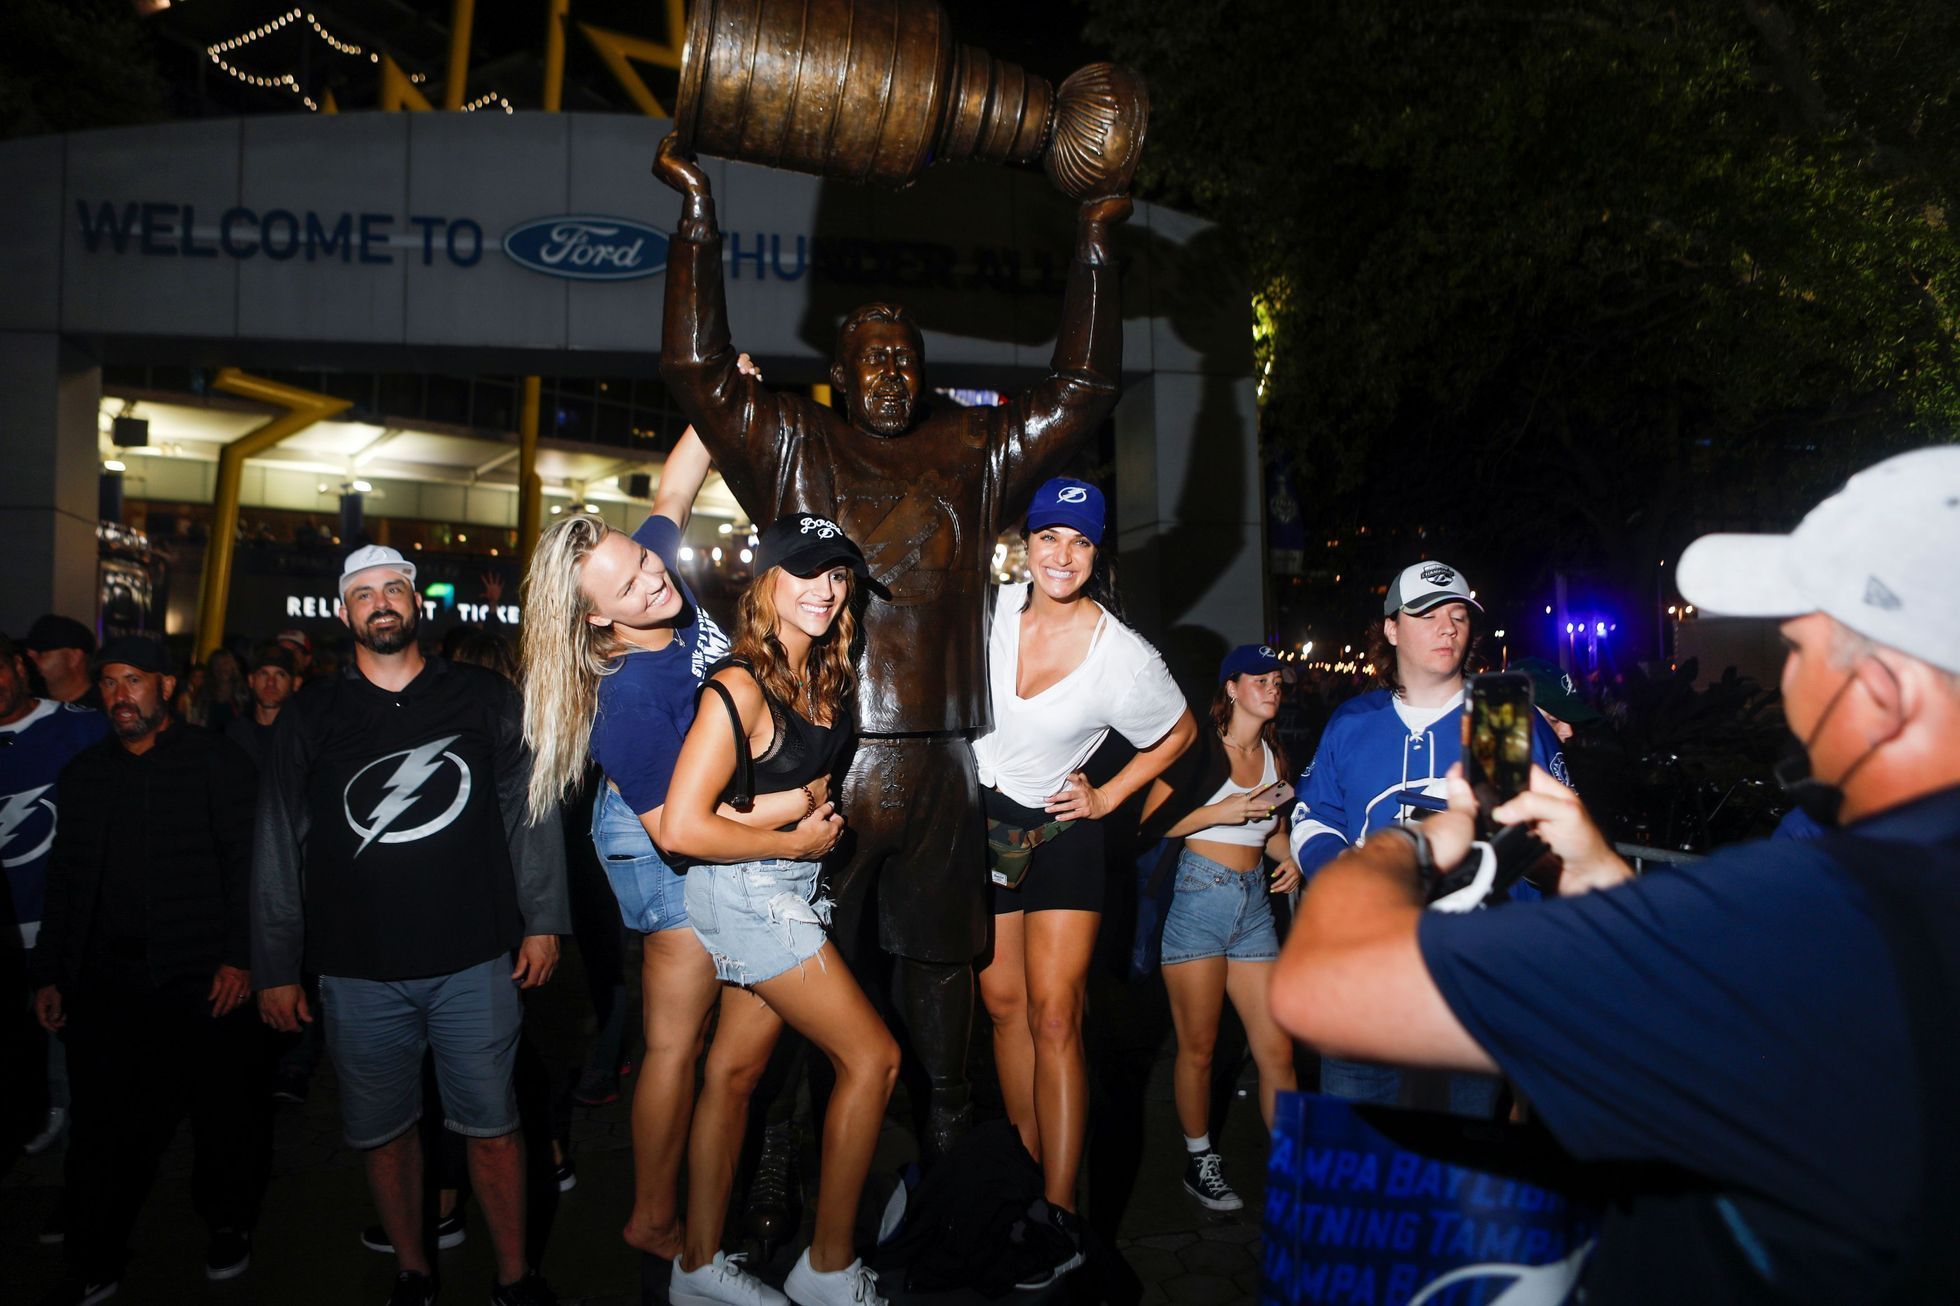 Fans celebrate after the Tampa Bay Lightning ice hockey team won the NHL Stanley Cup Finals over the Montreal Canadiens, in Tampa